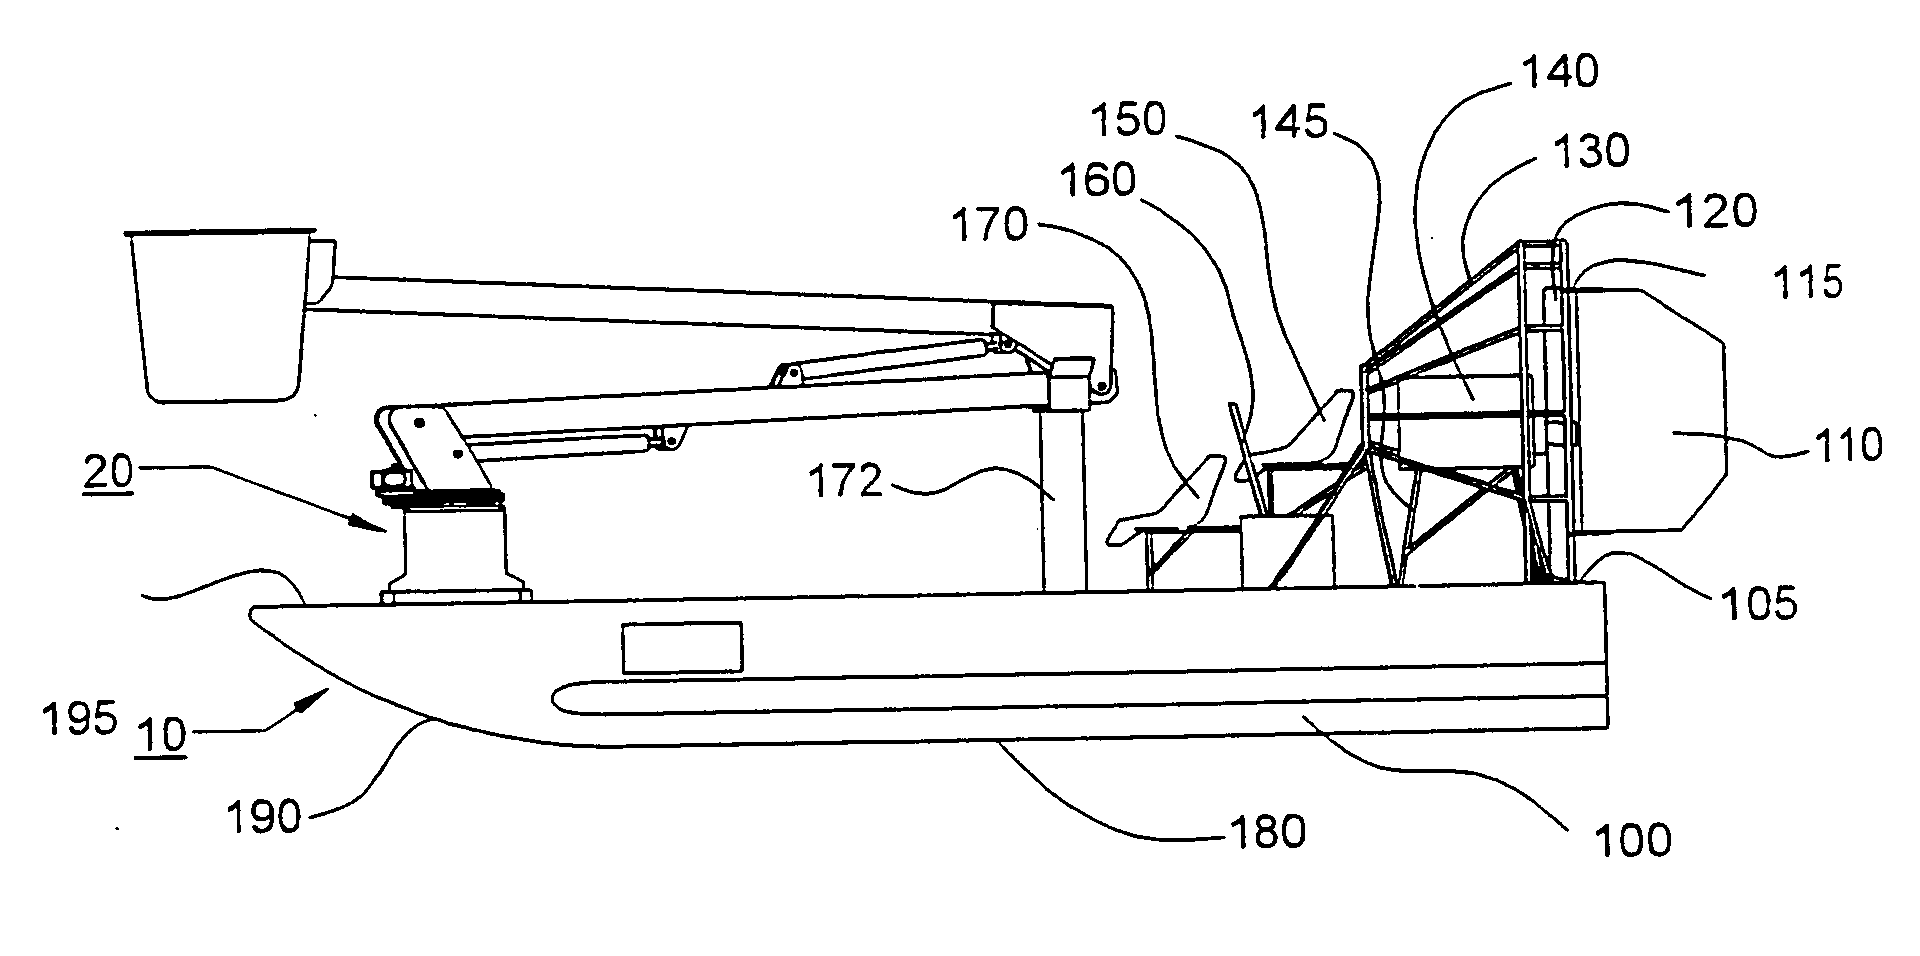 Air-propelled vessel with articulating member